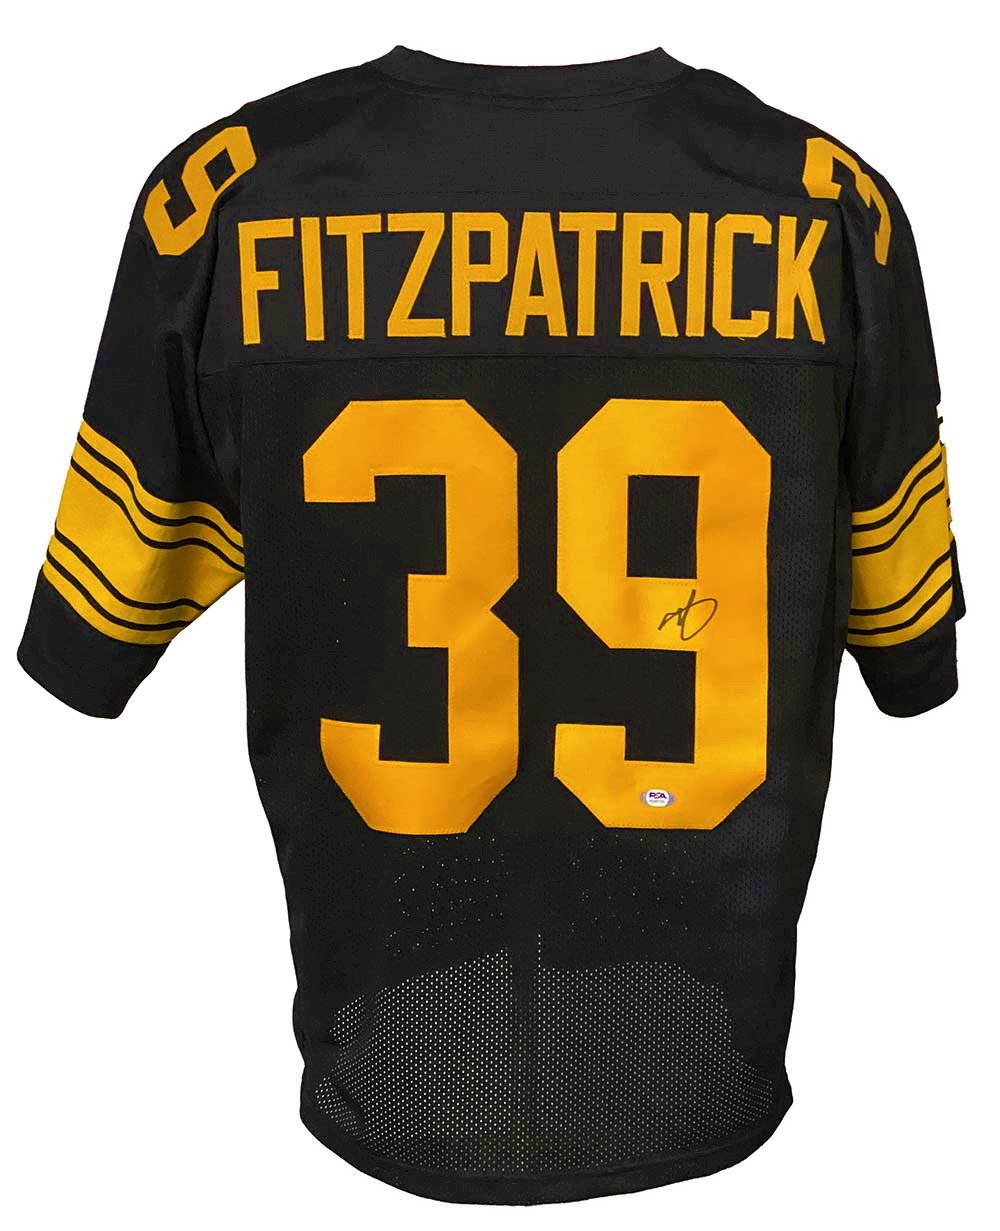 fitzpatrick color rush jersey